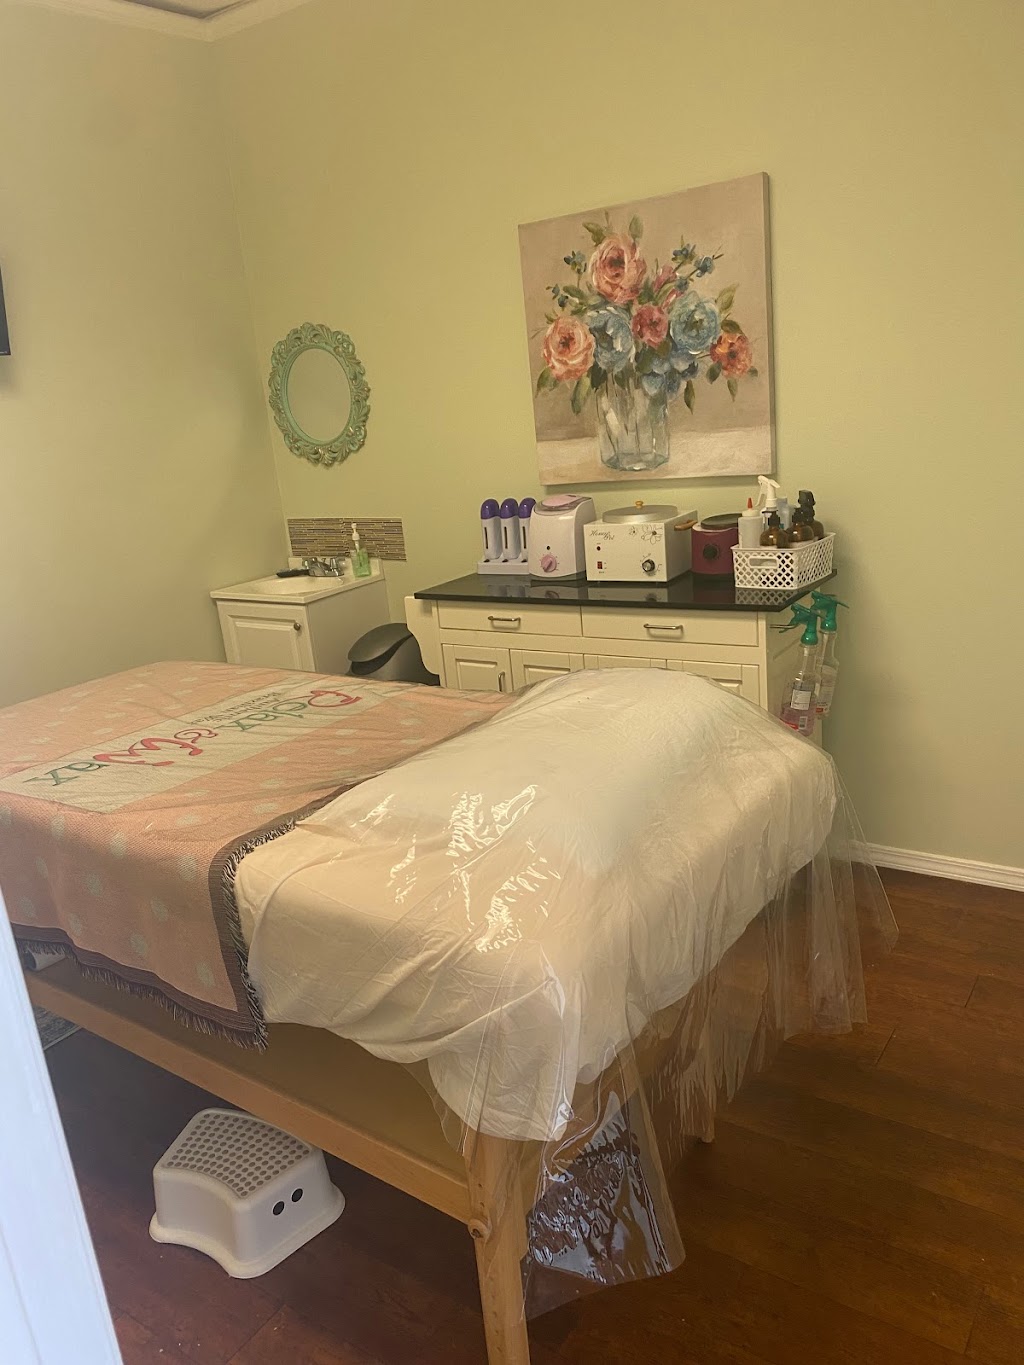 Relax & Wax Authentic Brazilian Wax & Sugaring | 3414 W 7th St, Fort Worth, TX 76107, USA | Phone: (817) 367-9111